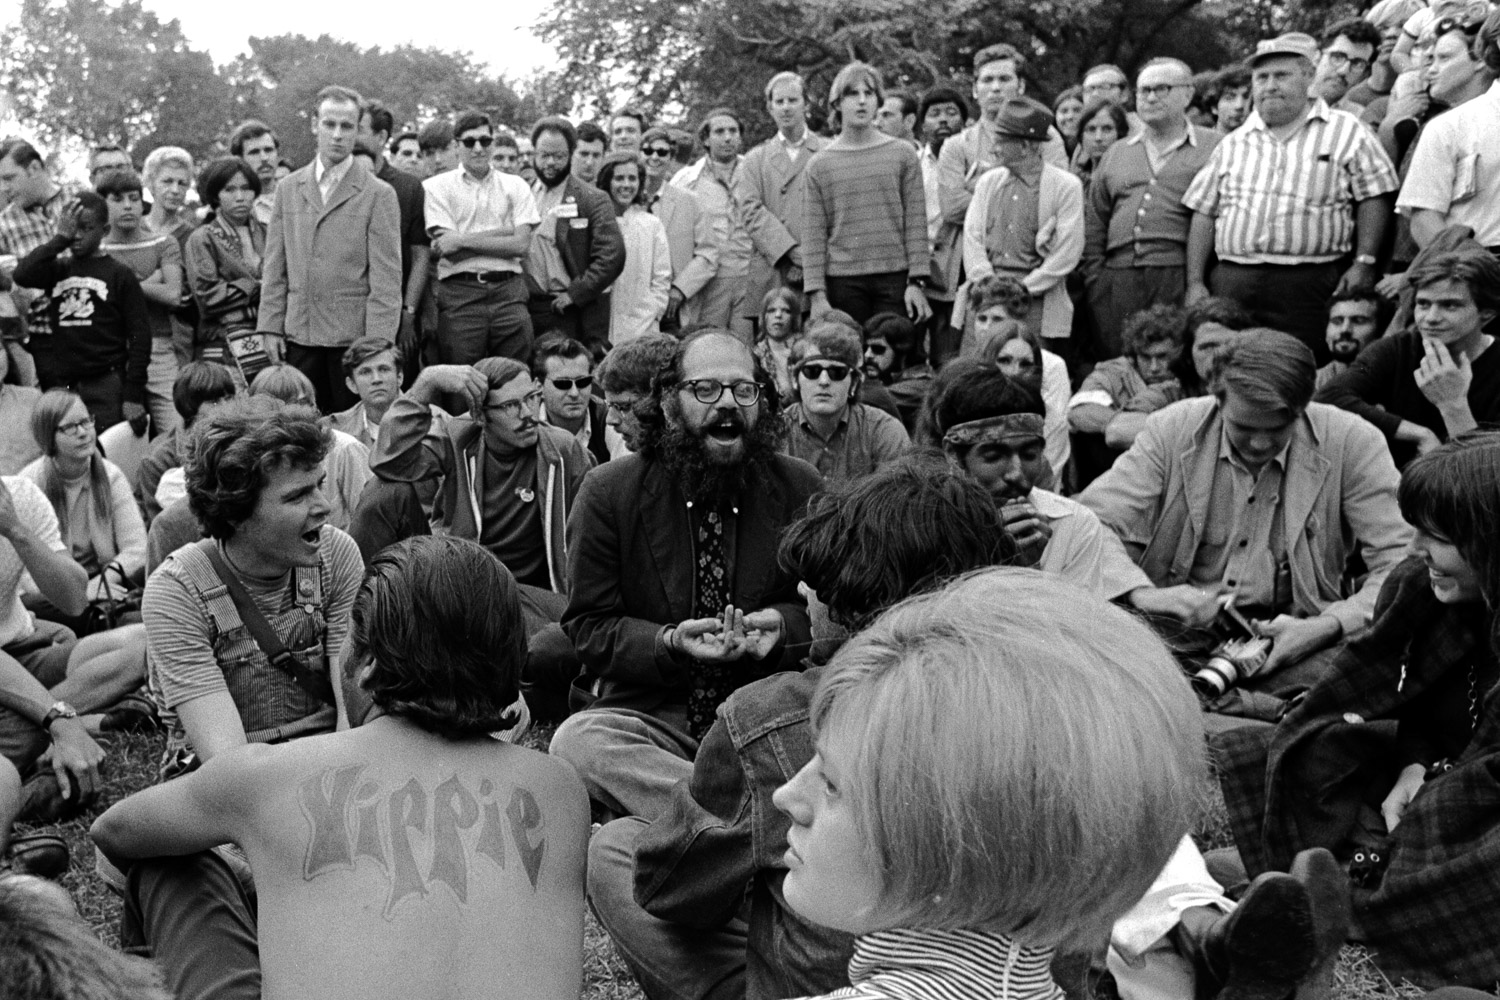  Allen Ginsberg is chanting "om" in long, sustained breaths, joined by hundreds of participants from all walks of life. 